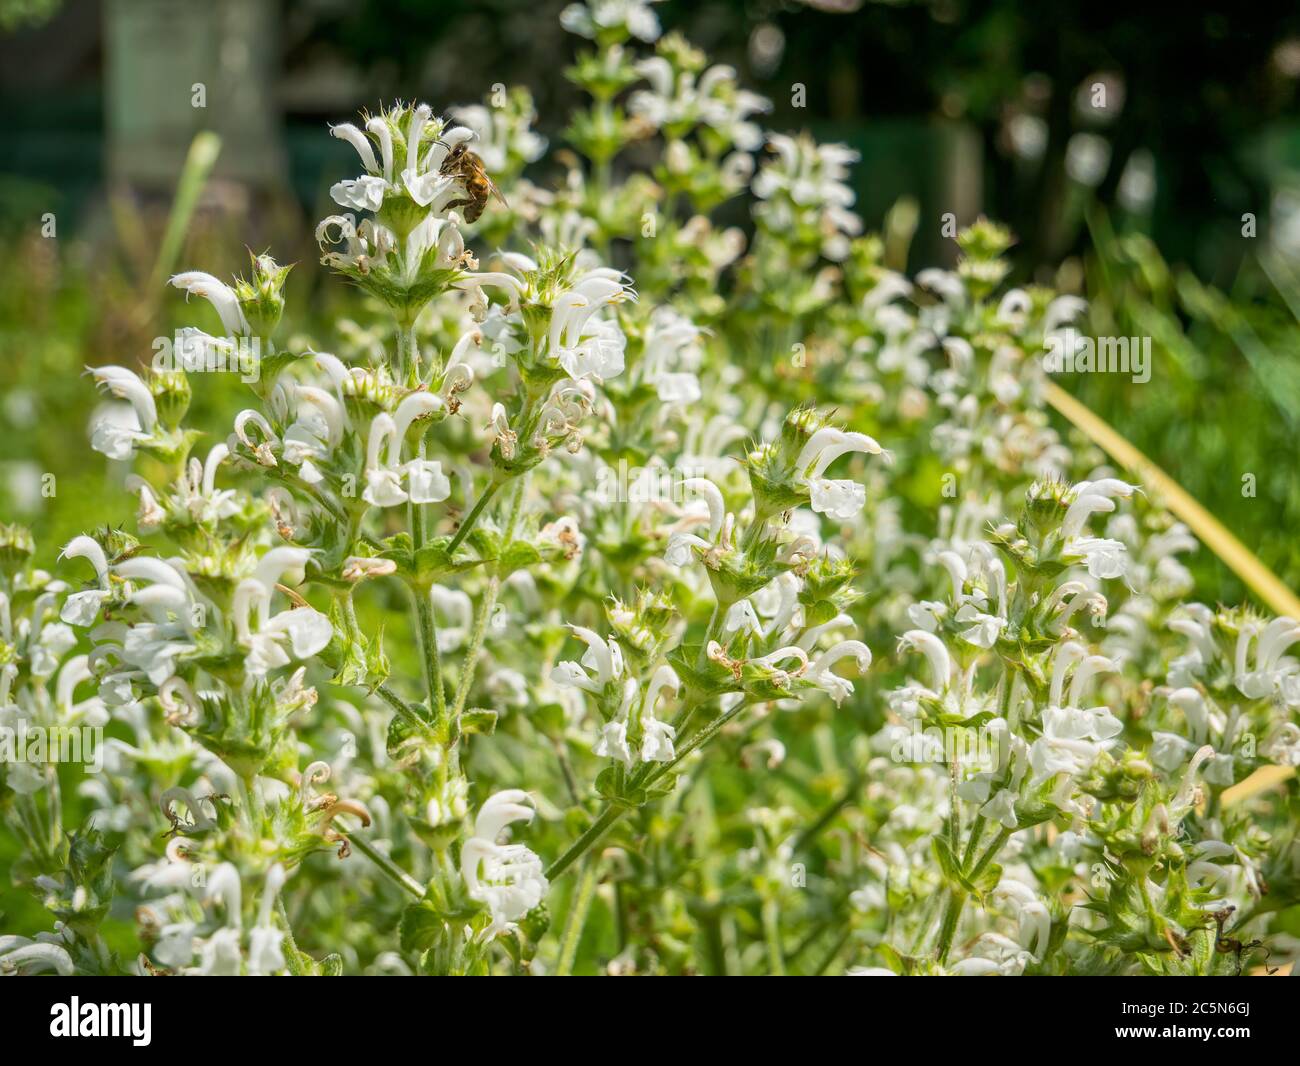 Salvia aethiopis also known as Mediterranean or African sage. Many small white flowers with blurred background. Stock Photo